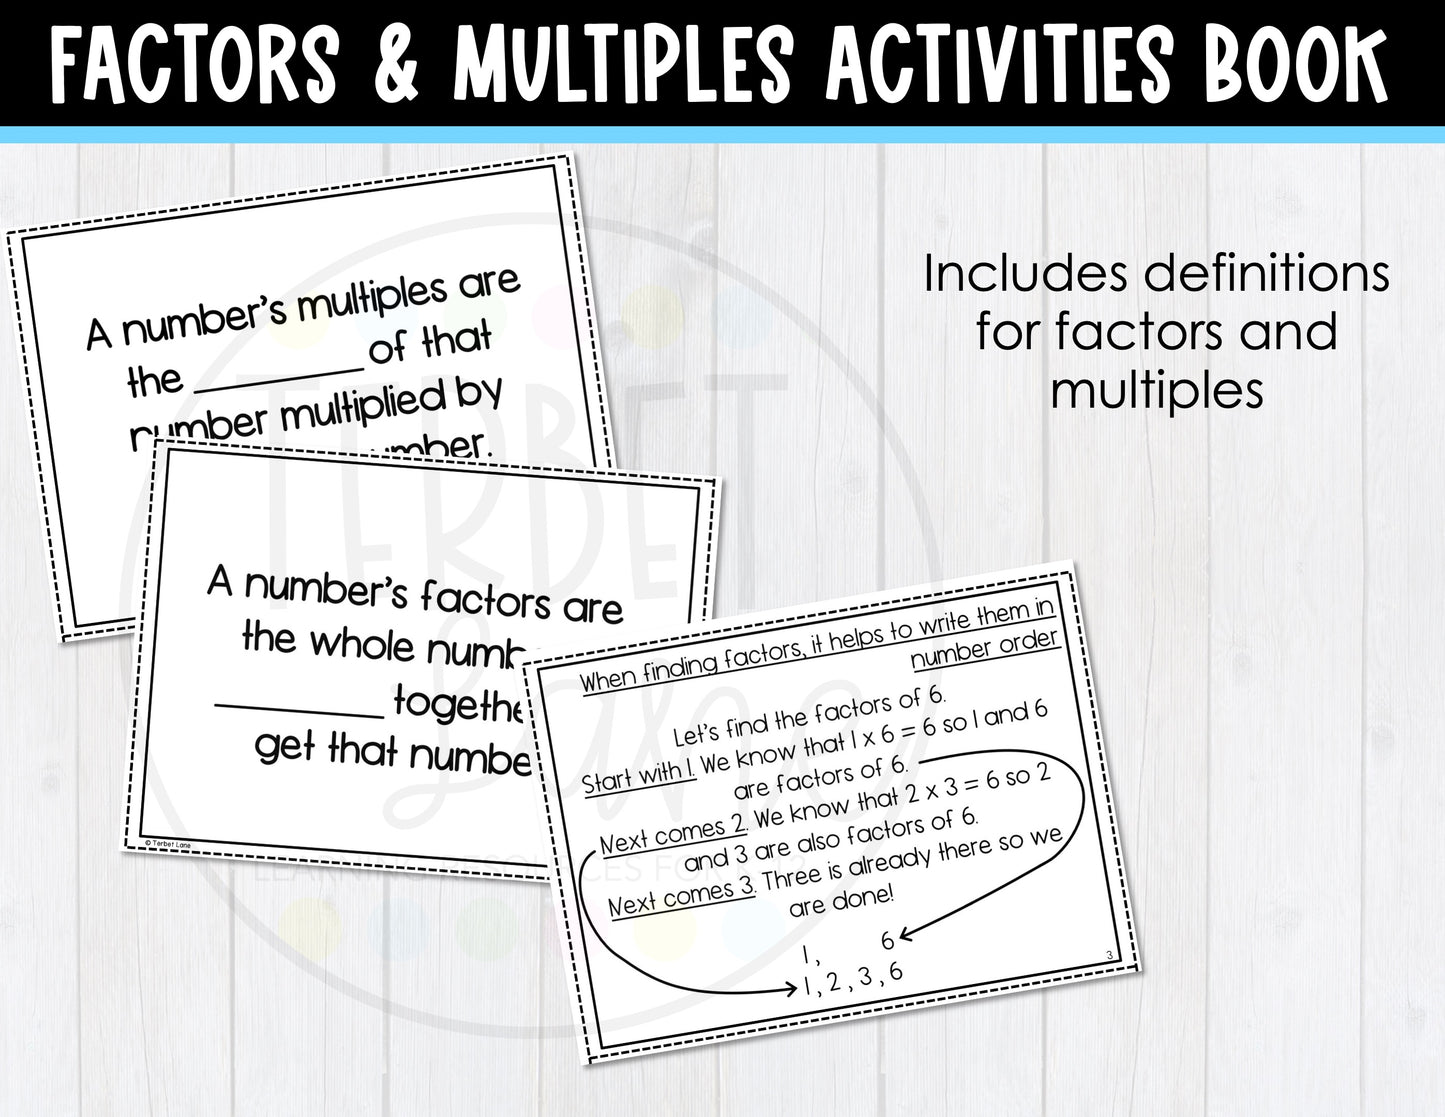 Factors and Multiples Activities Book